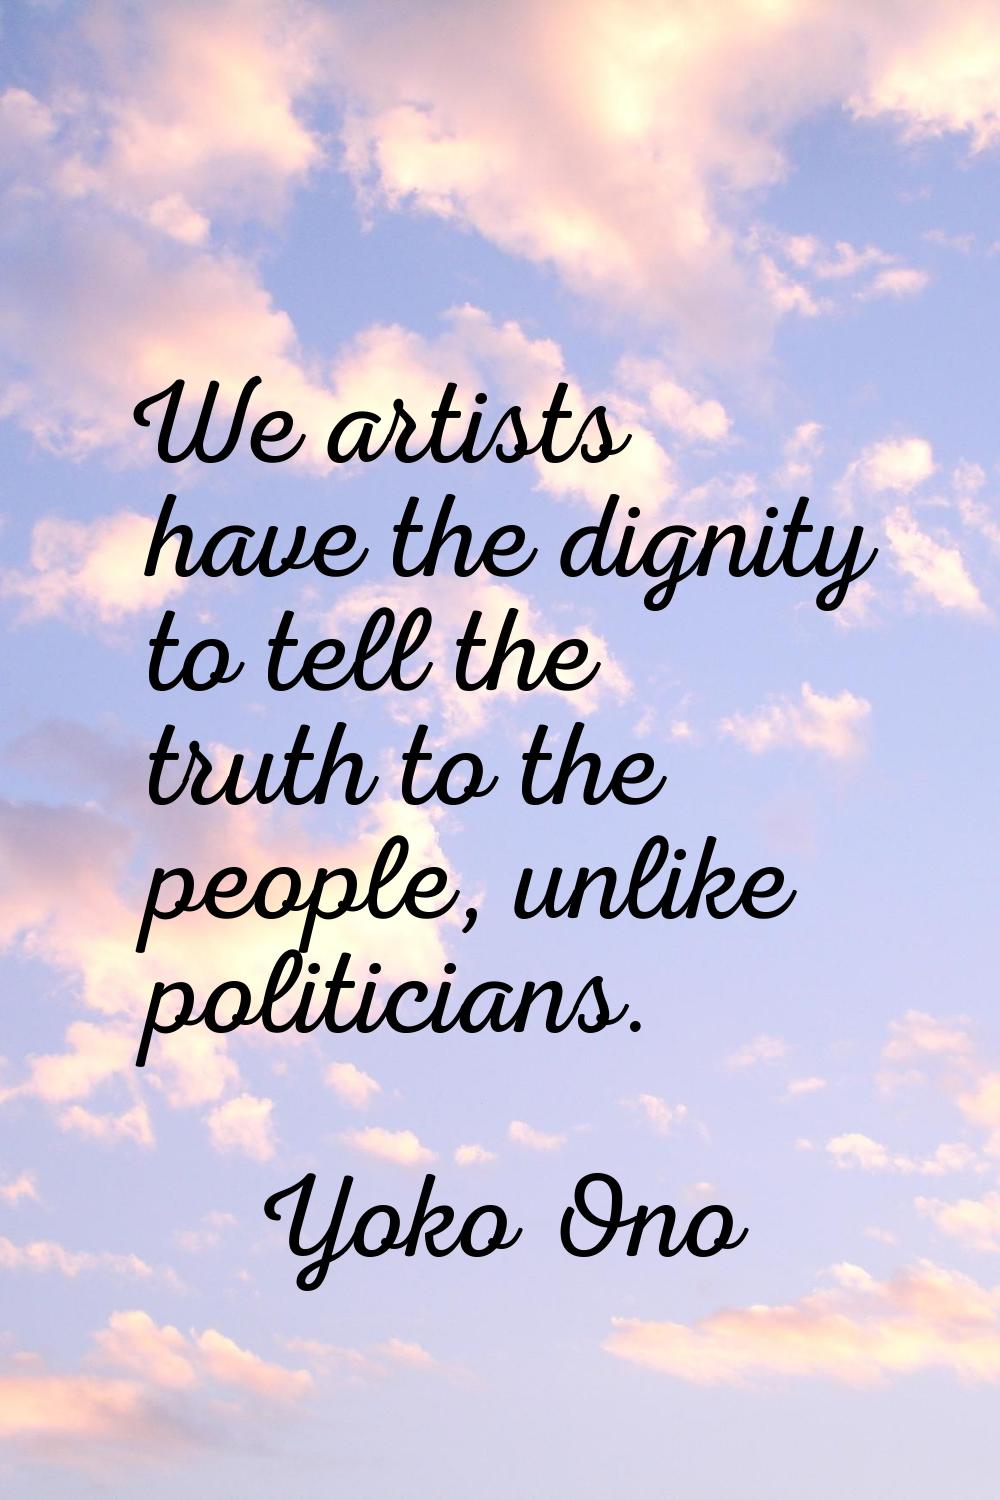 We artists have the dignity to tell the truth to the people, unlike politicians.